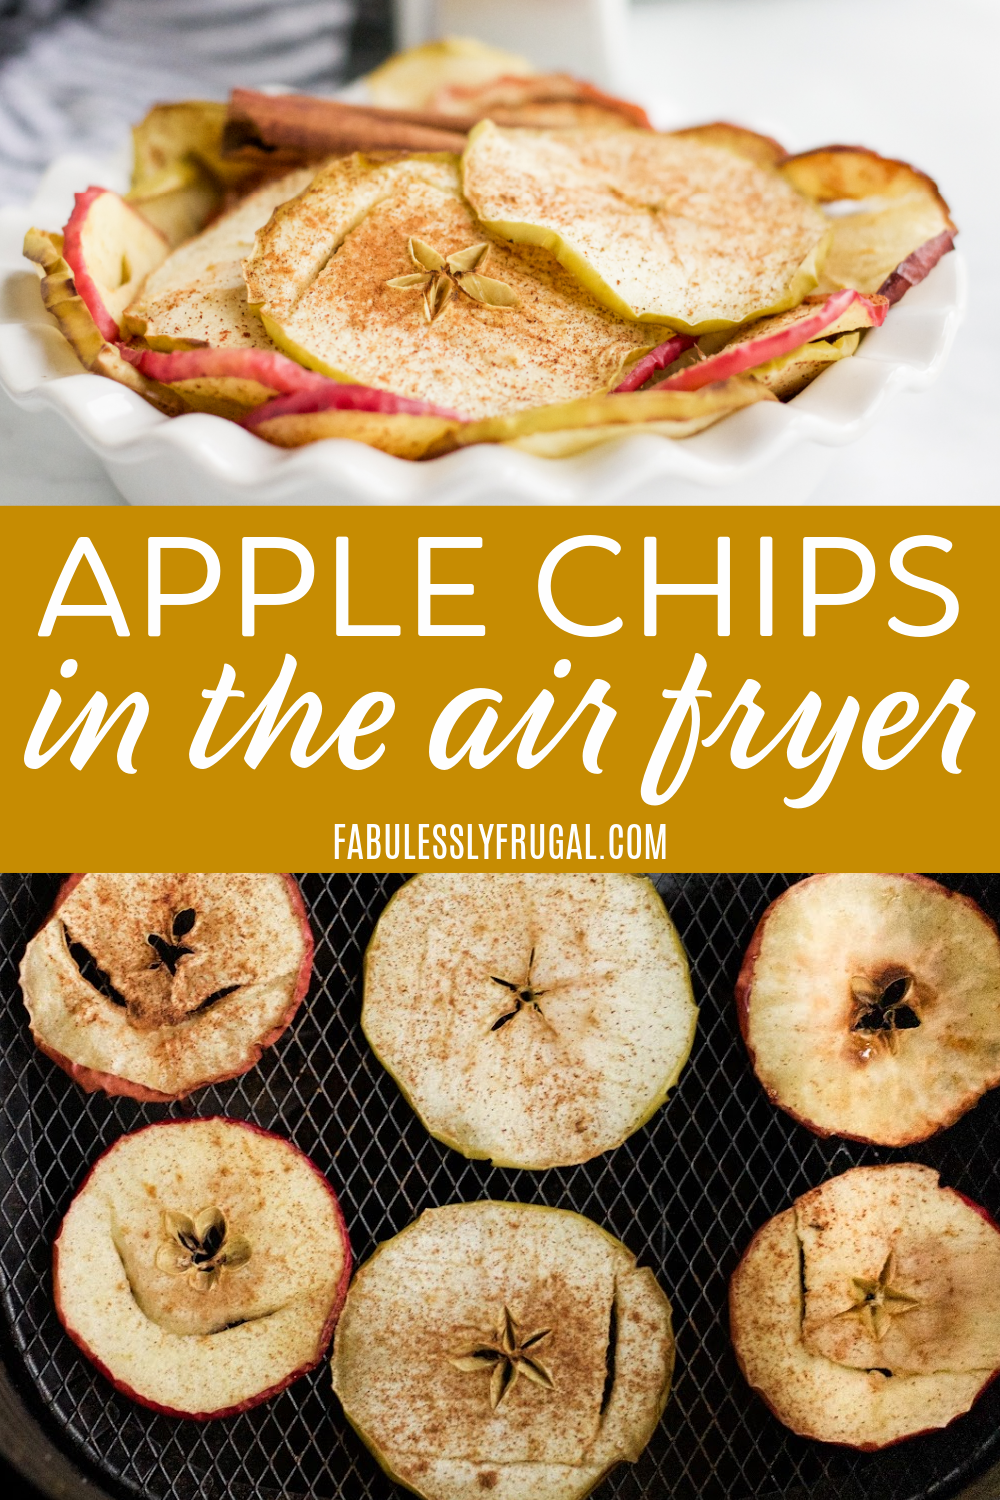 You can make these yummy air fryer apple chips for a healthy afternoon snack this new year